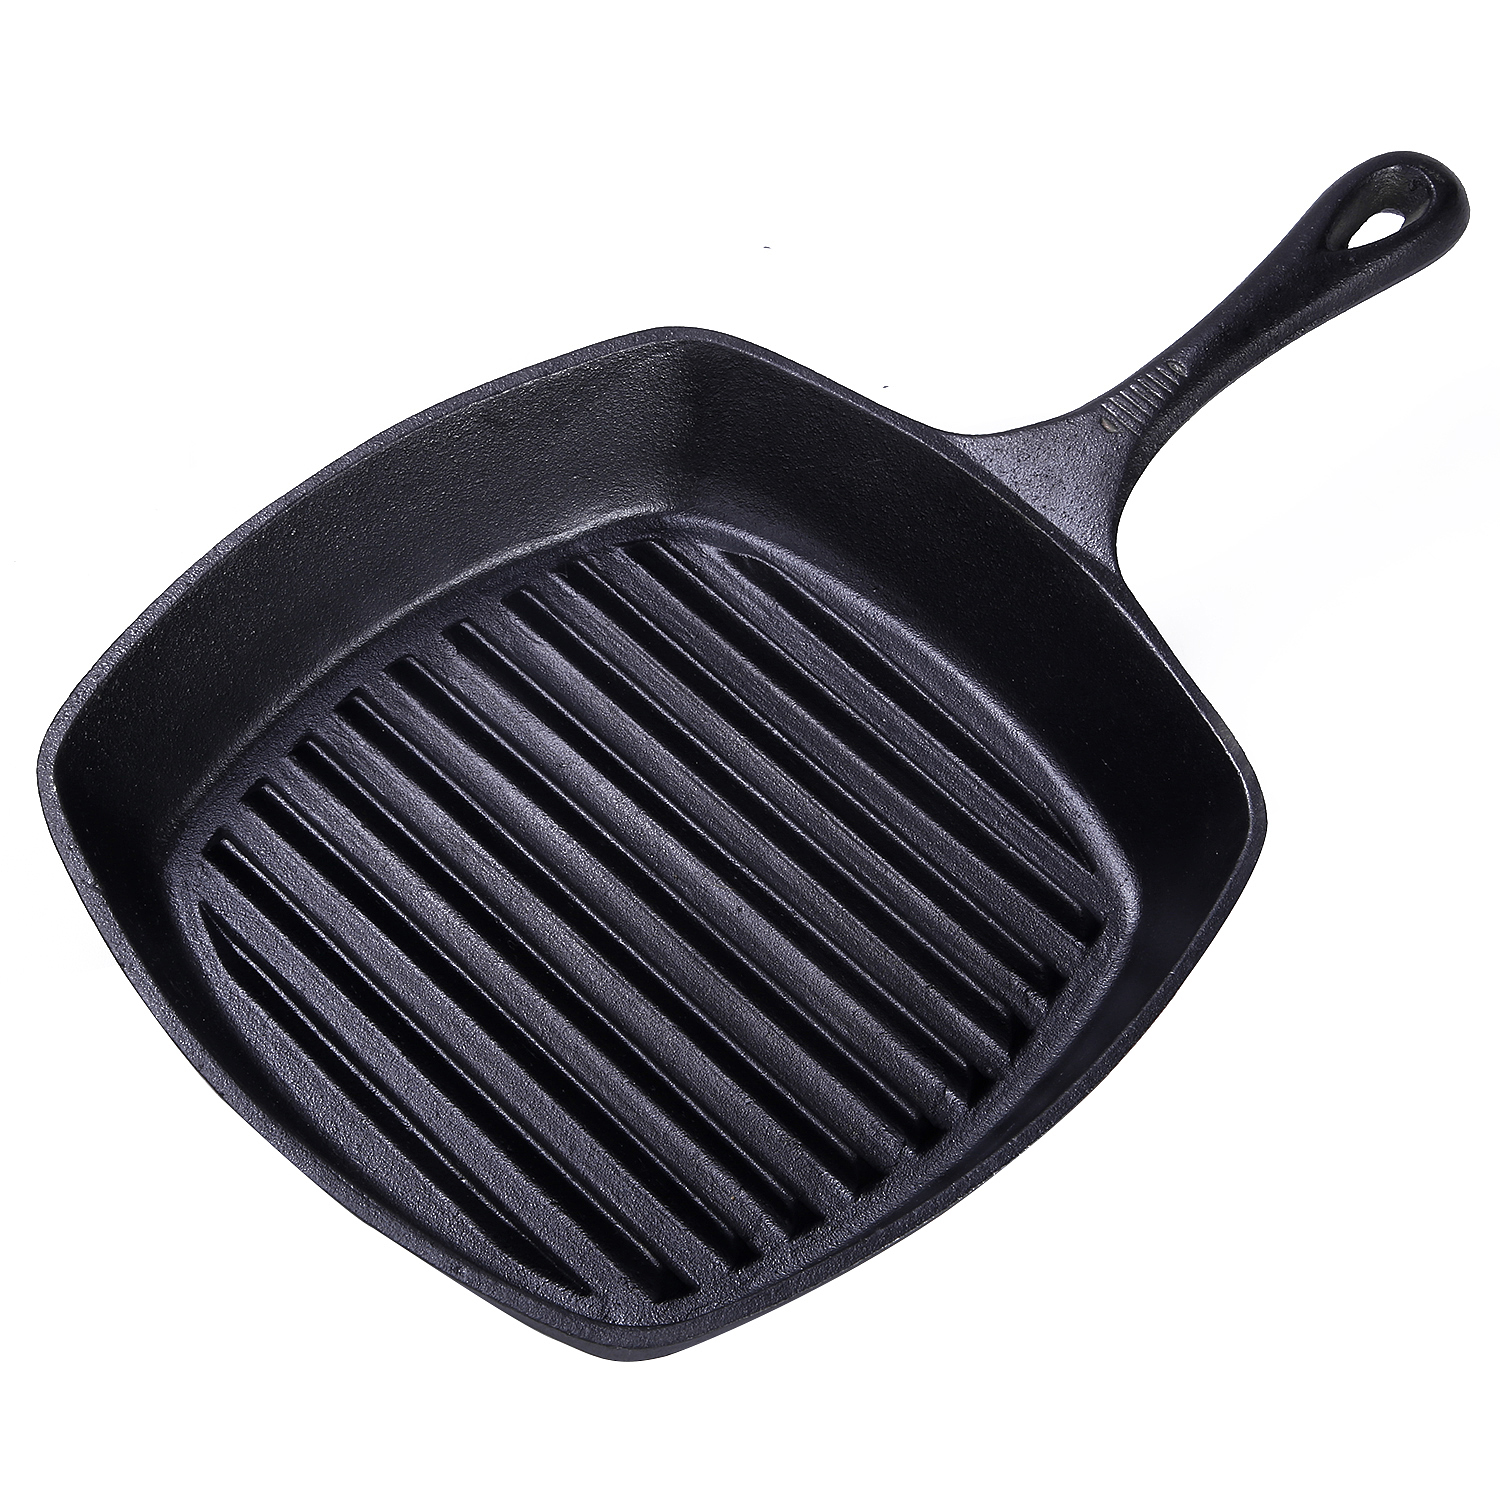 Cast iron pre-seasoned grill pan with 10inch Featured Image